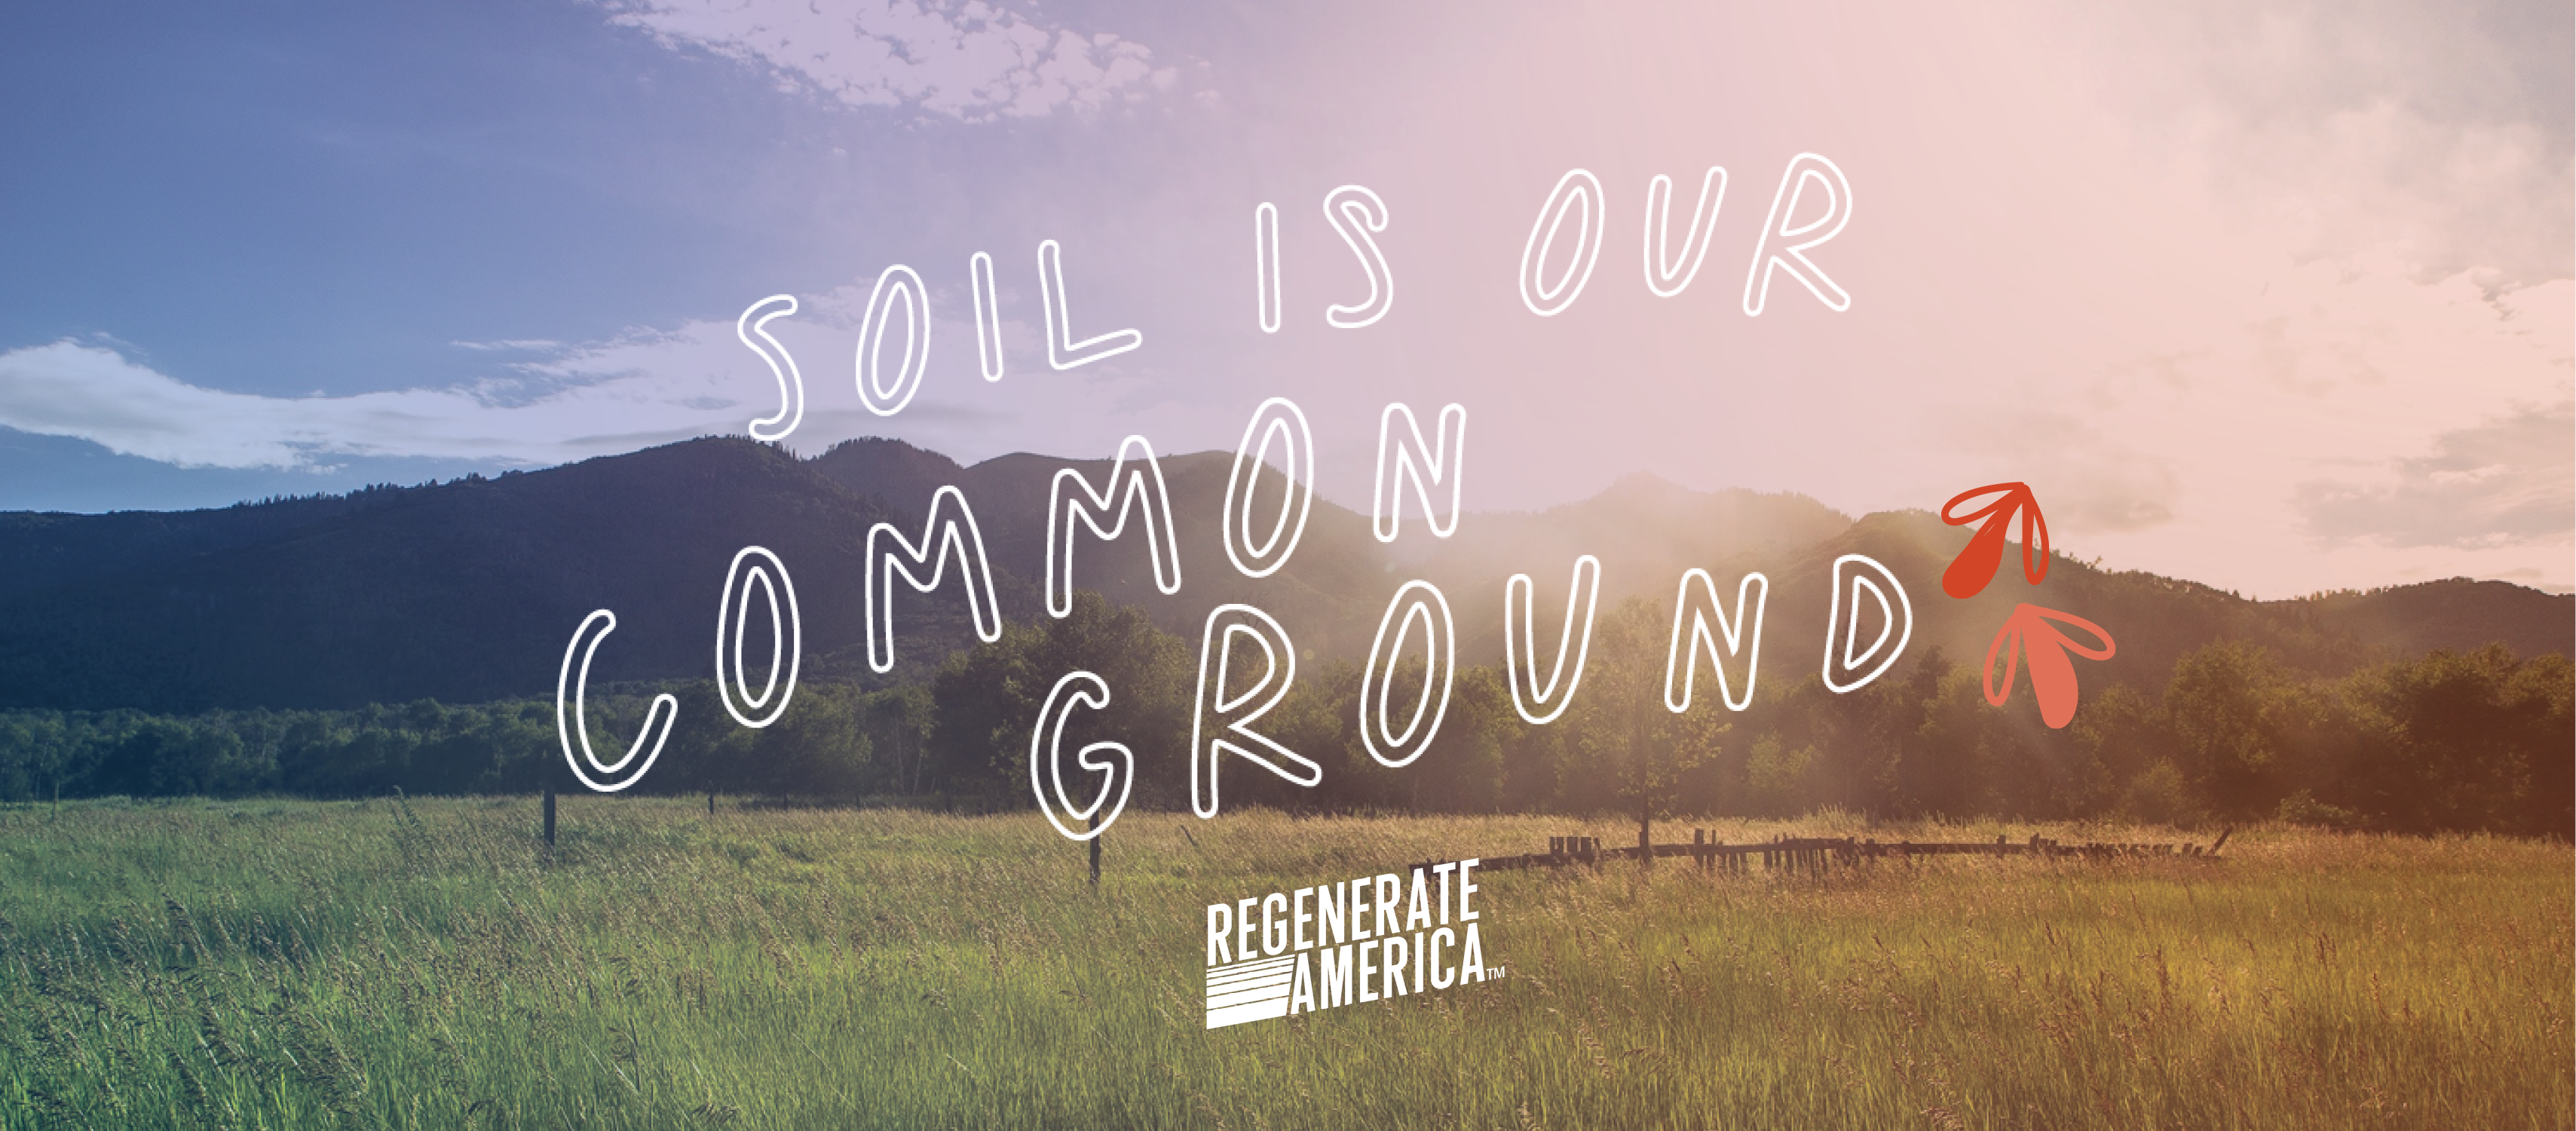 Soil is our common ground banner with meadow and hills in the background